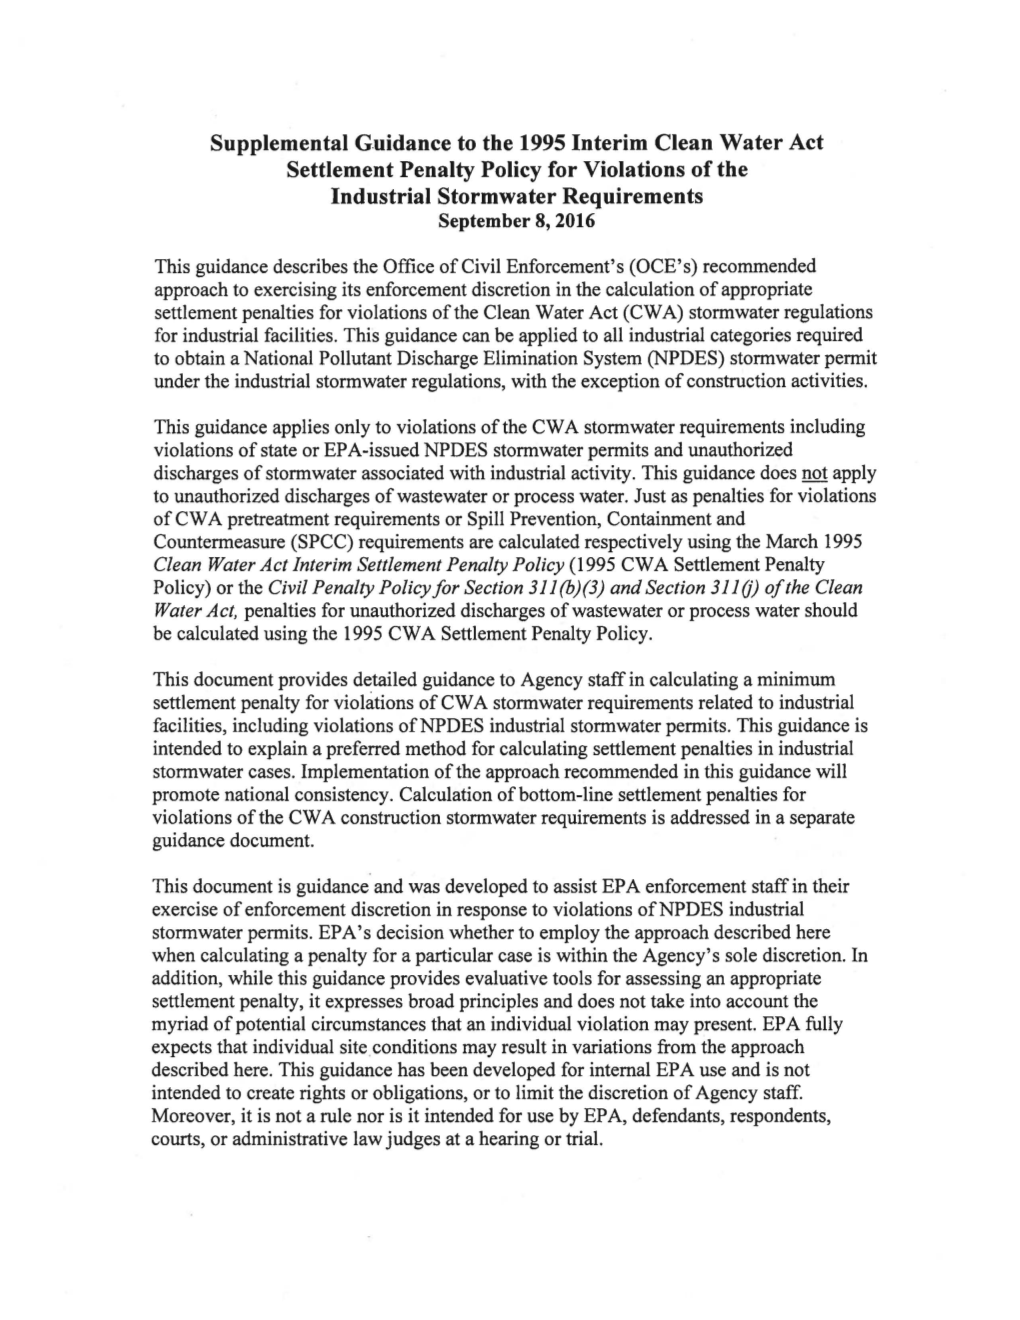 Supplemental Guidance to the 1995 Interim Clean Water Act Settlement Penalty Policy for Violations of the Industrial Stormwater Requirements September 8, 2016